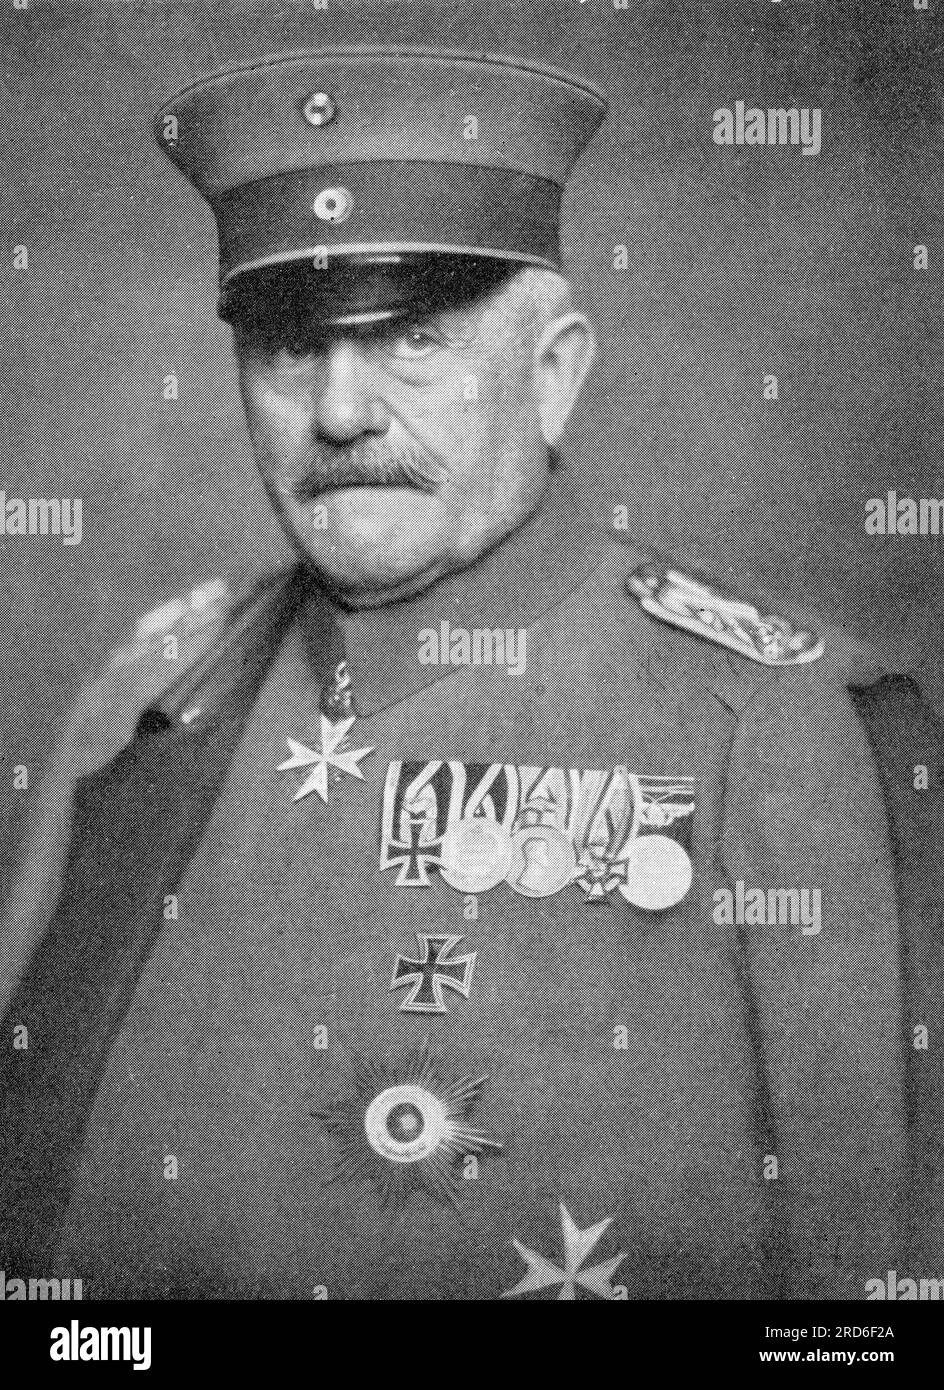 Woyrsch, Remus von, 4.2.1847 - 6.8.1920, German general, ADDITIONAL-RIGHTS-CLEARANCE-INFO-NOT-AVAILABLE Stock Photo